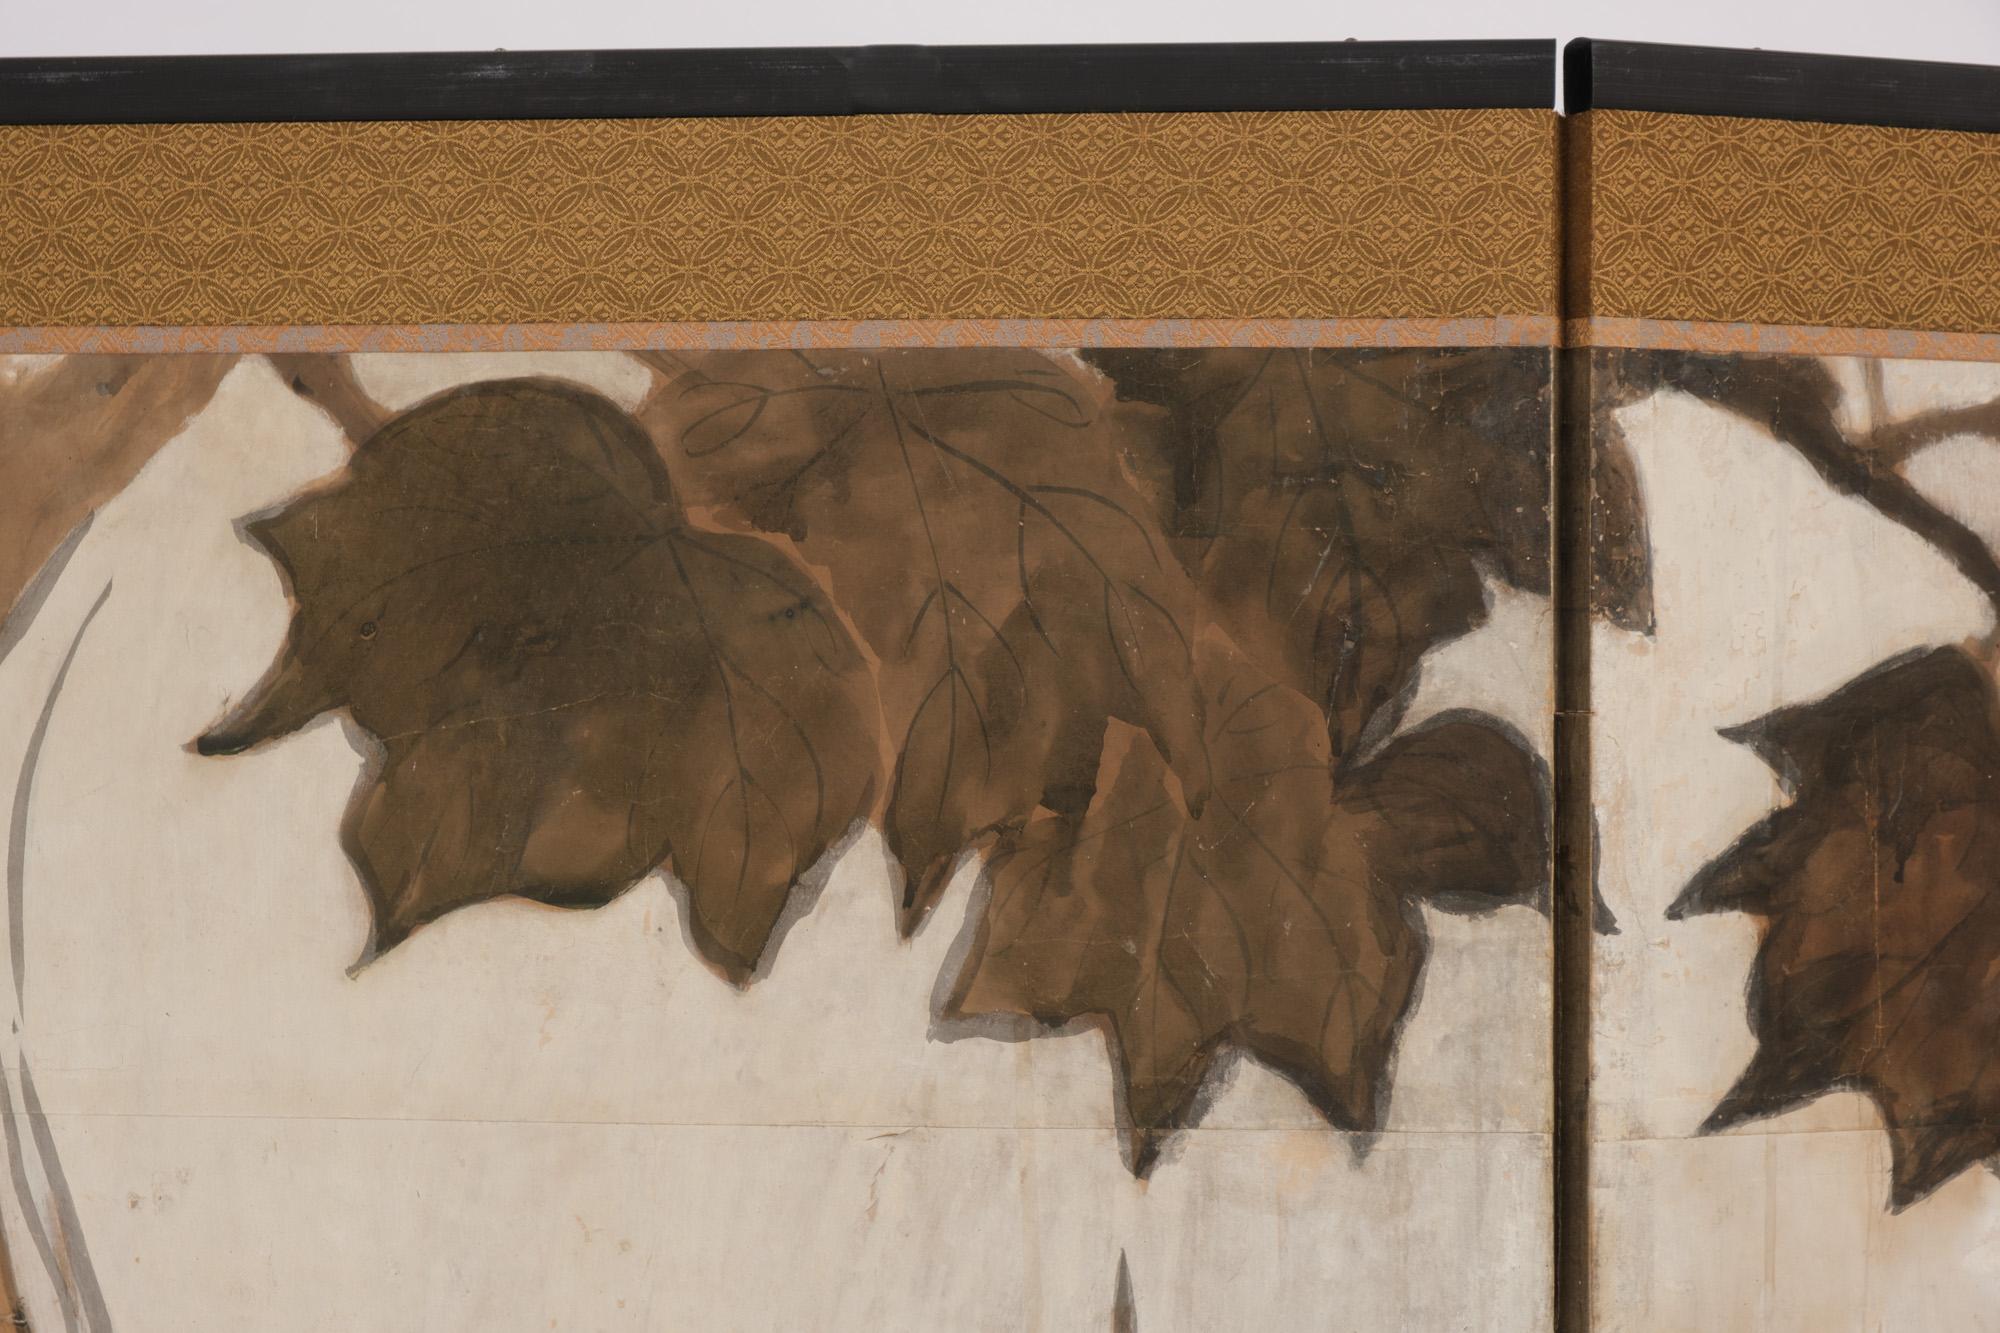 Japanese screen with a painting of an large elephant & monkey by Mori Kanson 森間村 For Sale 9